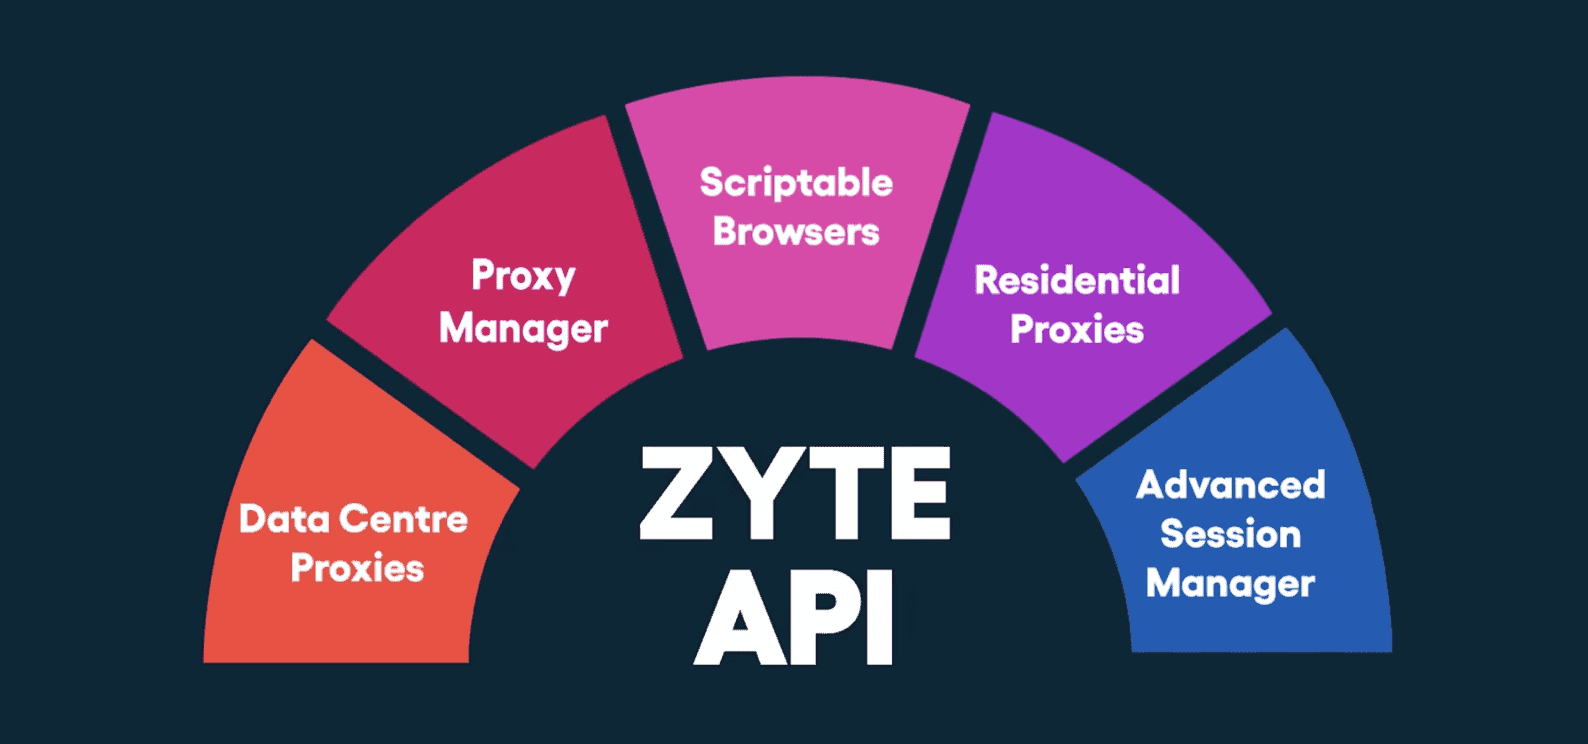 zyte api's scope of features